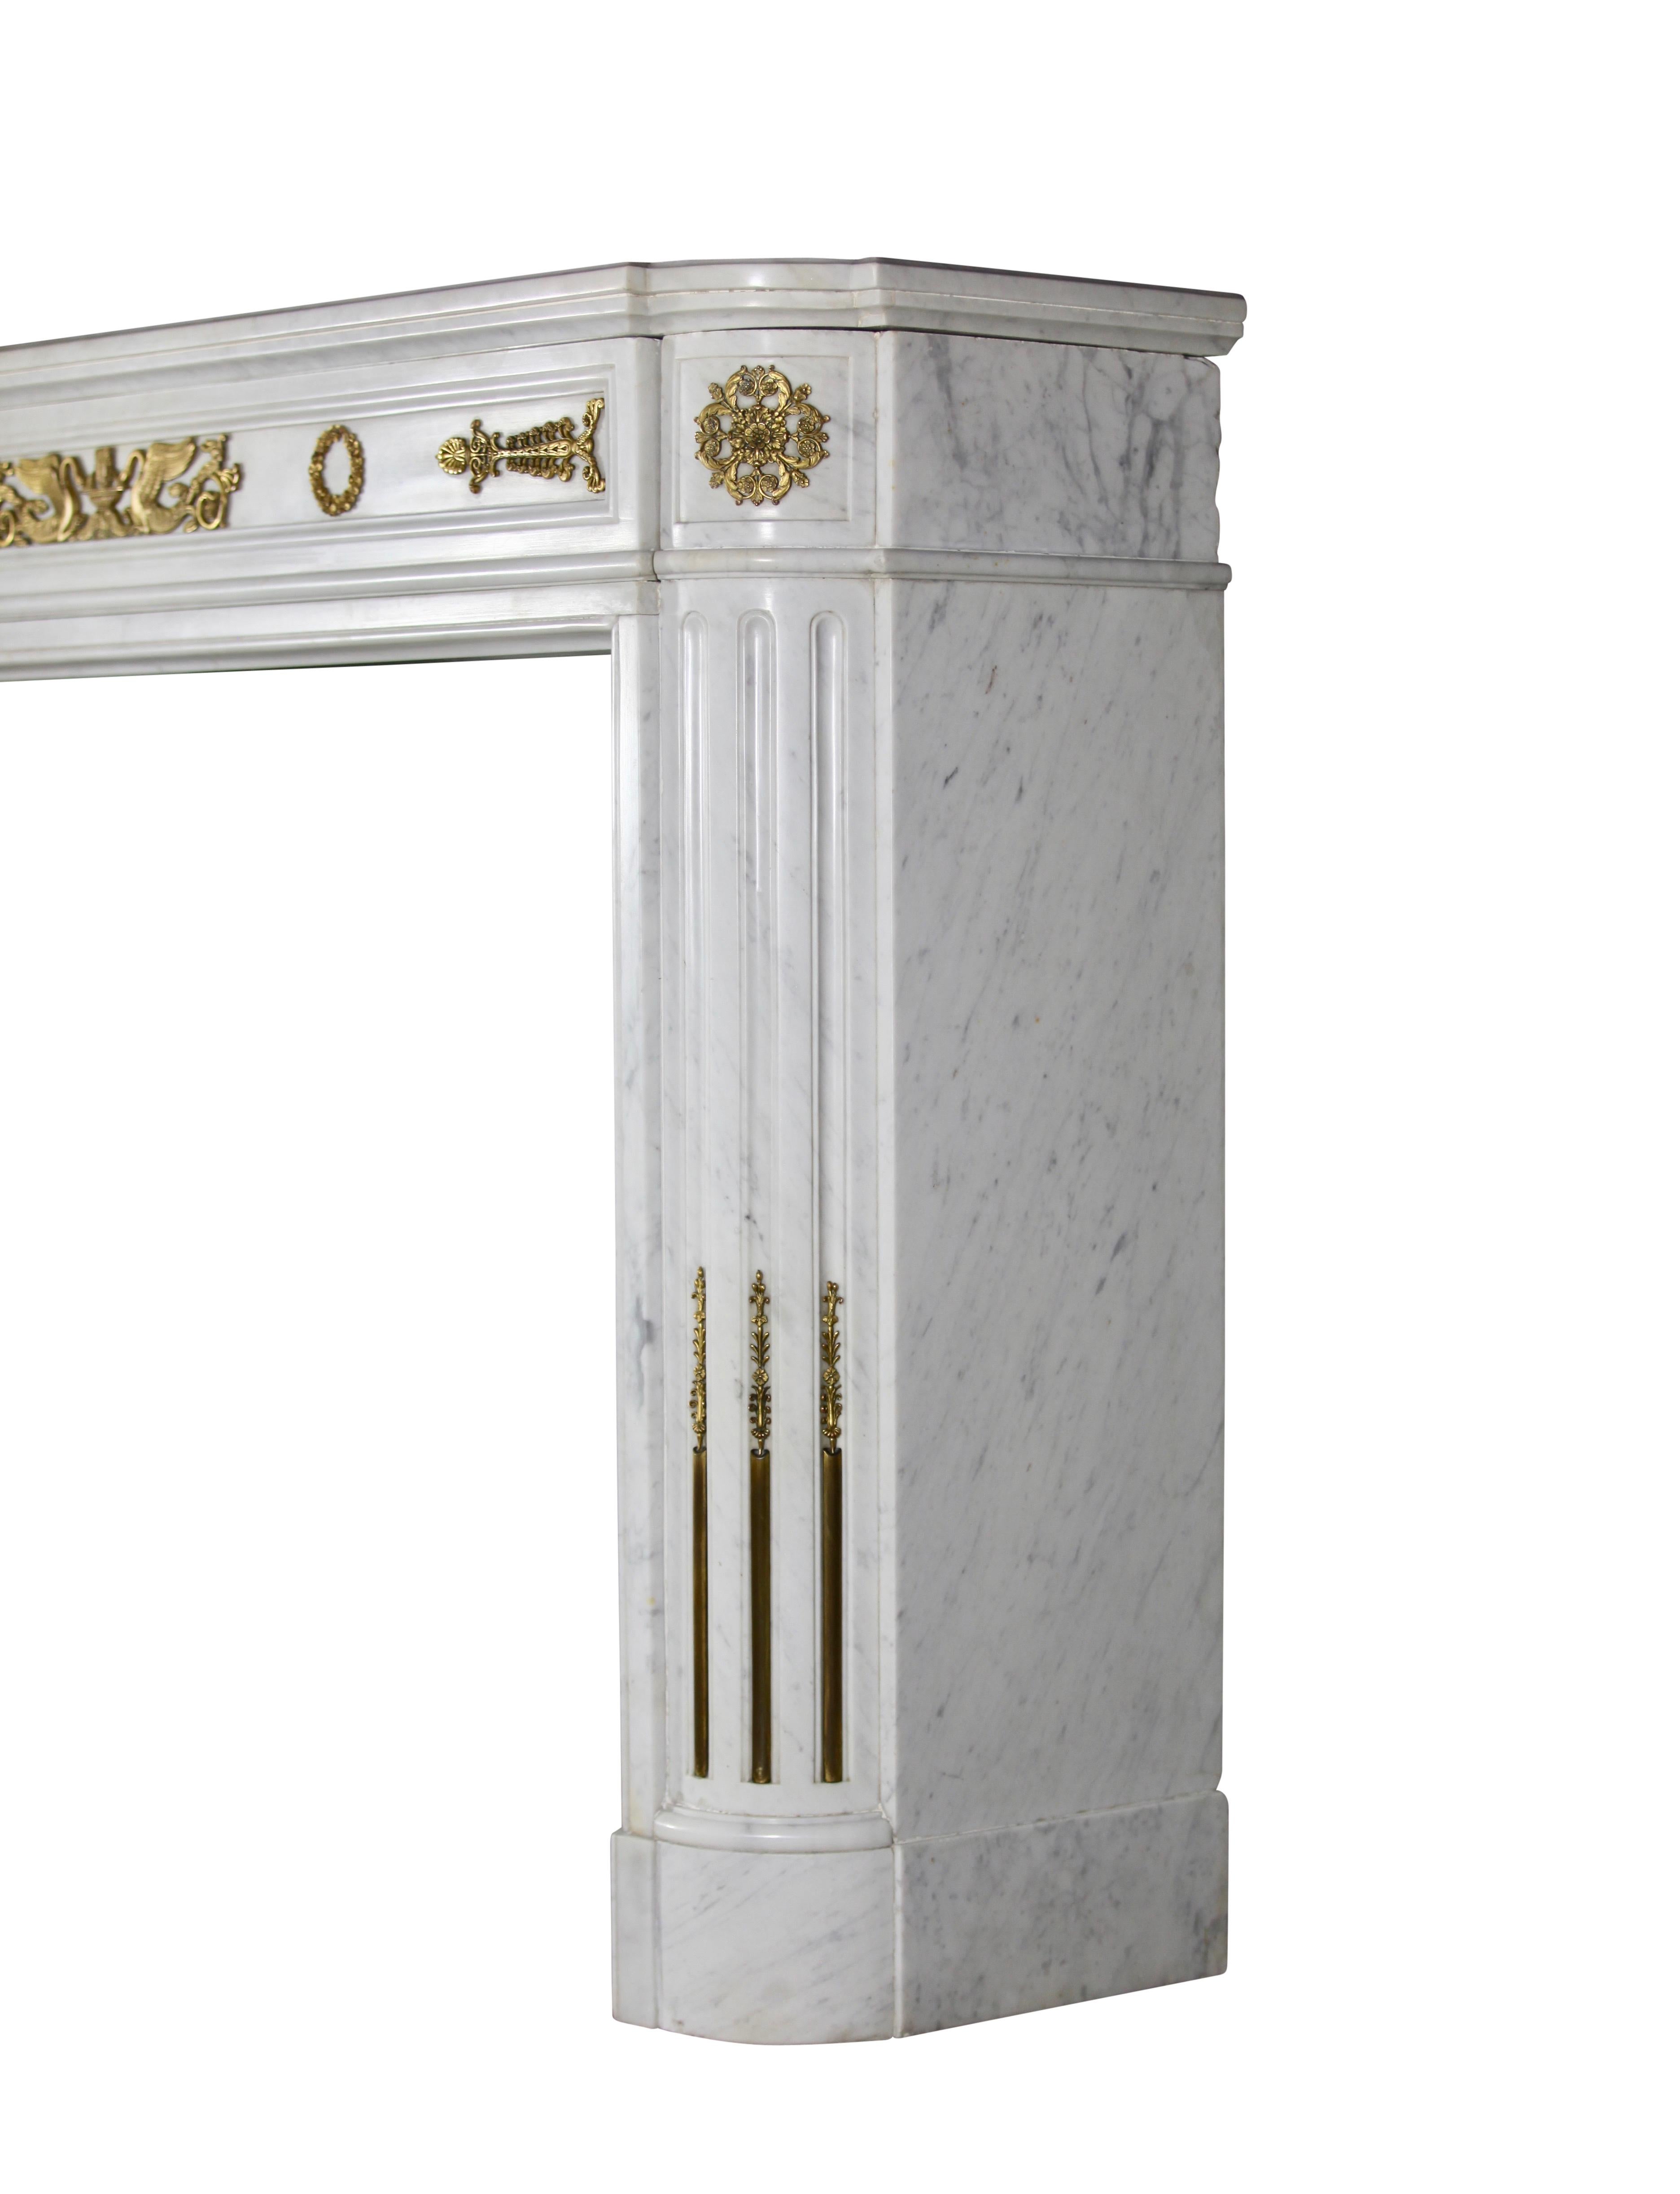 Brass Fine 19th Century European Original Antique Fireplace Mantle from Empire Period For Sale